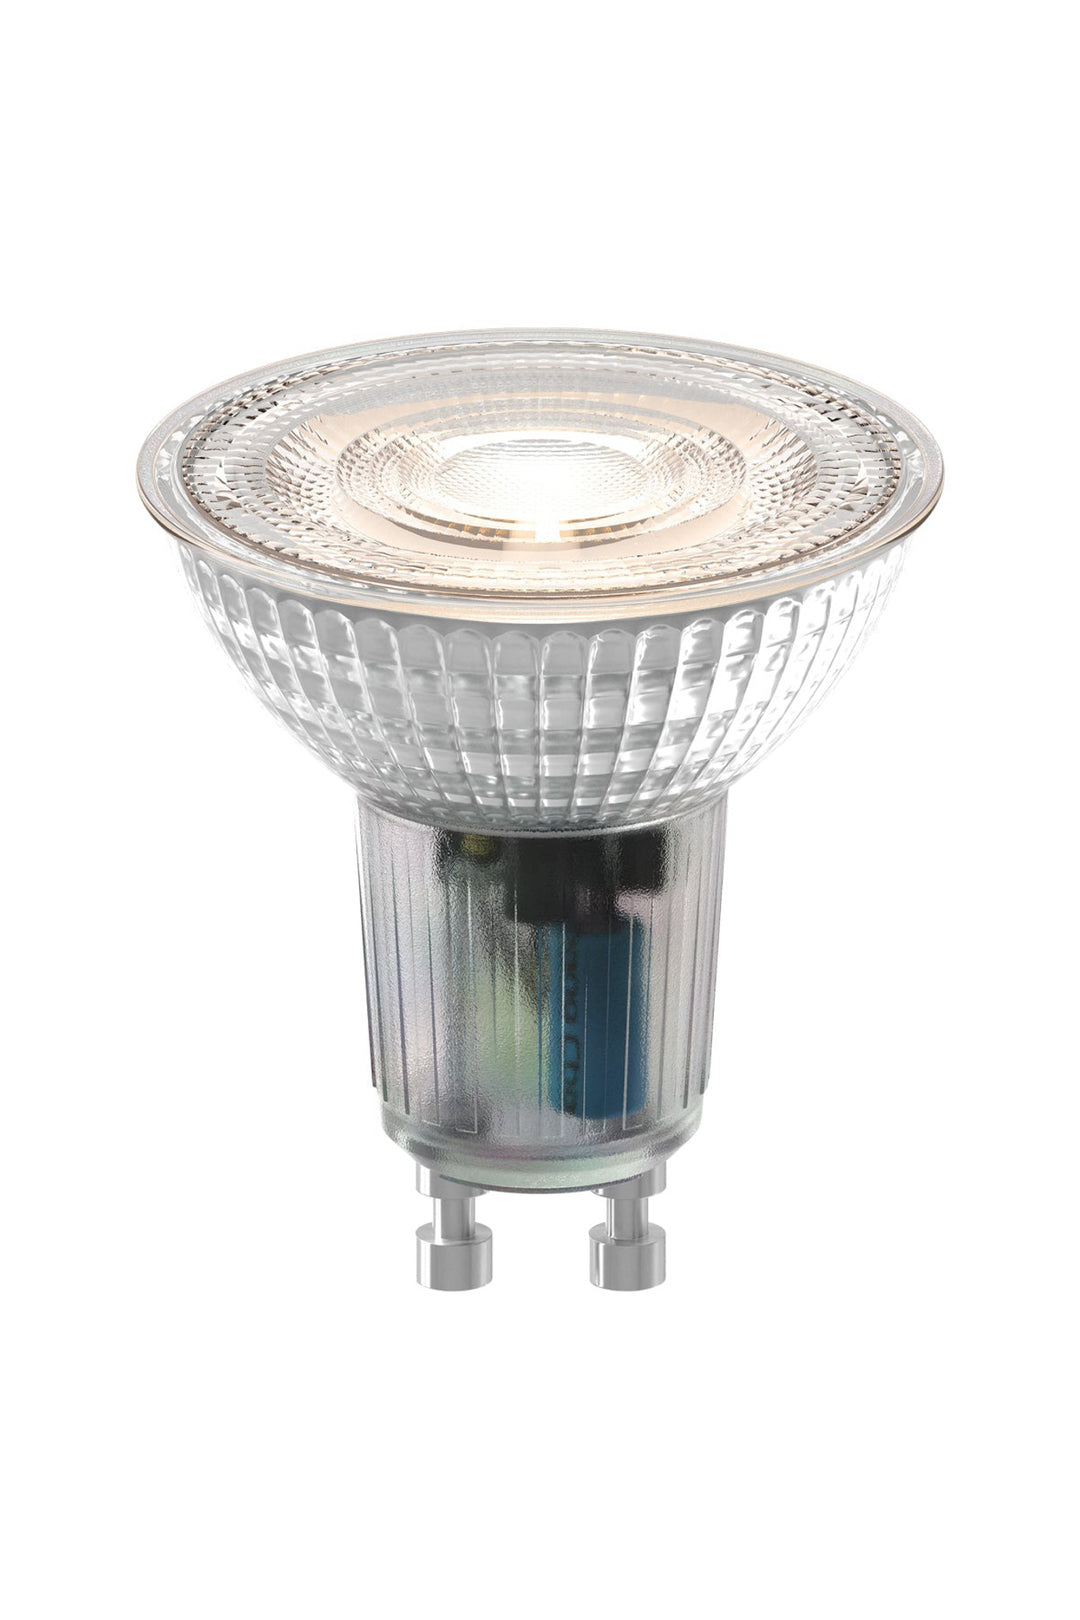 Calex LED SMD Halogen Look GU10 Lamp, GU10, Dimmable 1301000700